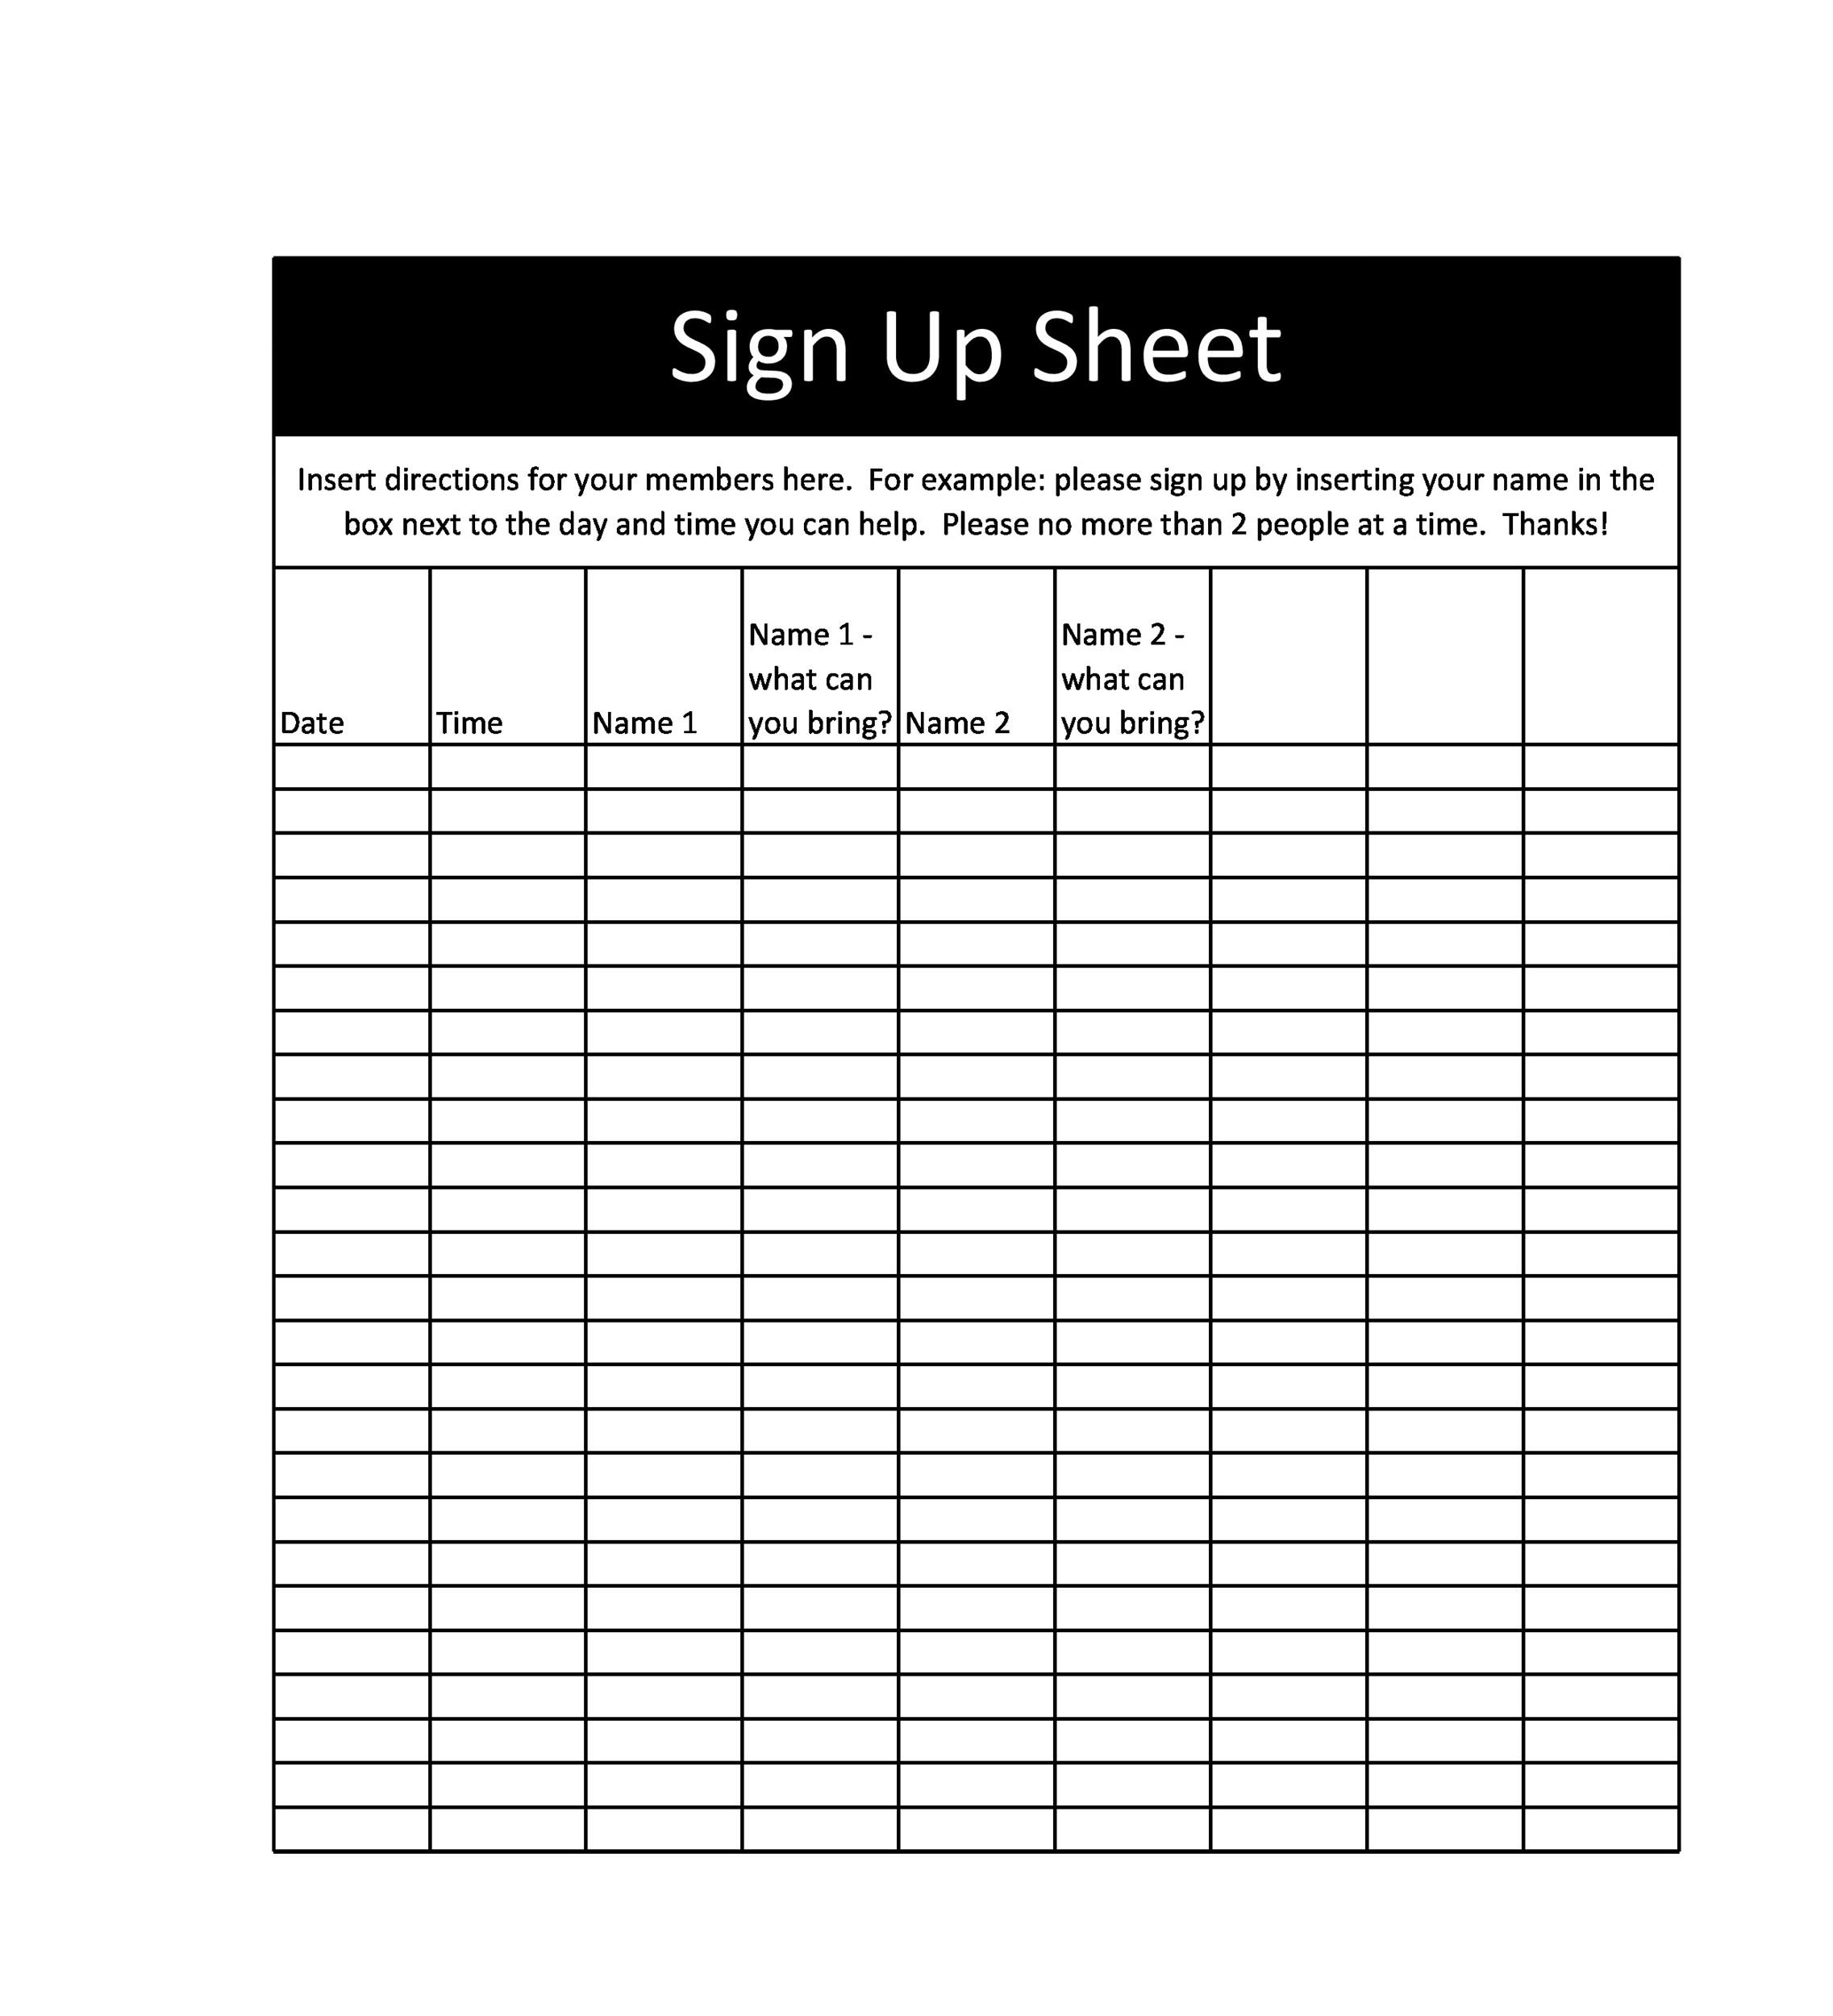 minimalist-sign-up-sheet-3-email-sign-up-forms-printable-etsy